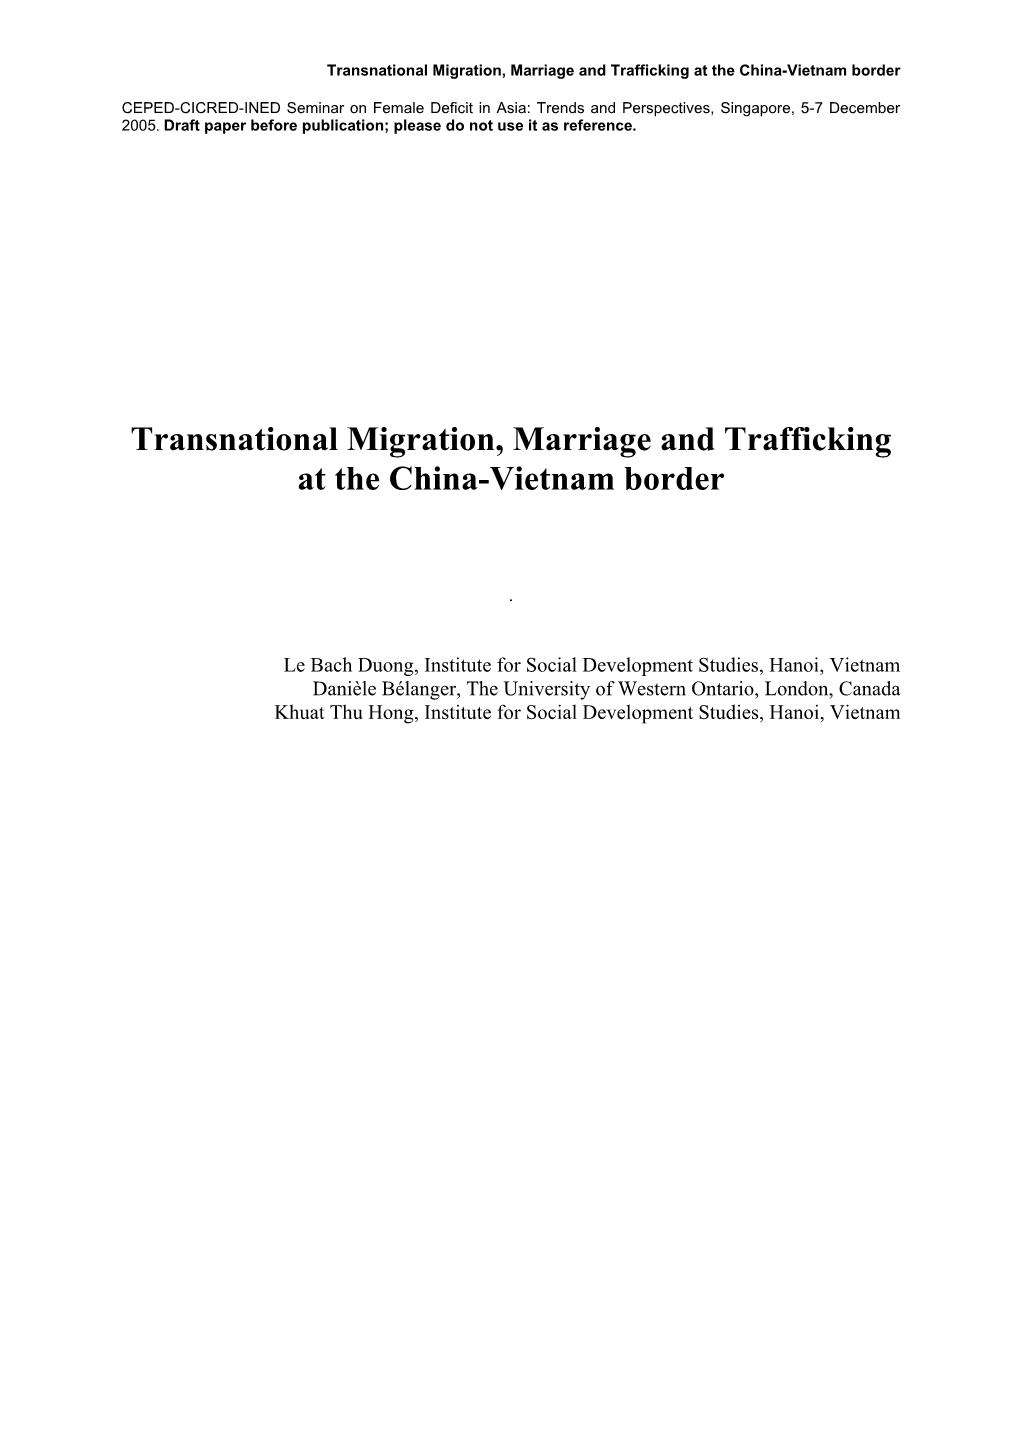 Transnational Migration, Marriage and Trafficking at the China-Vietnam Border